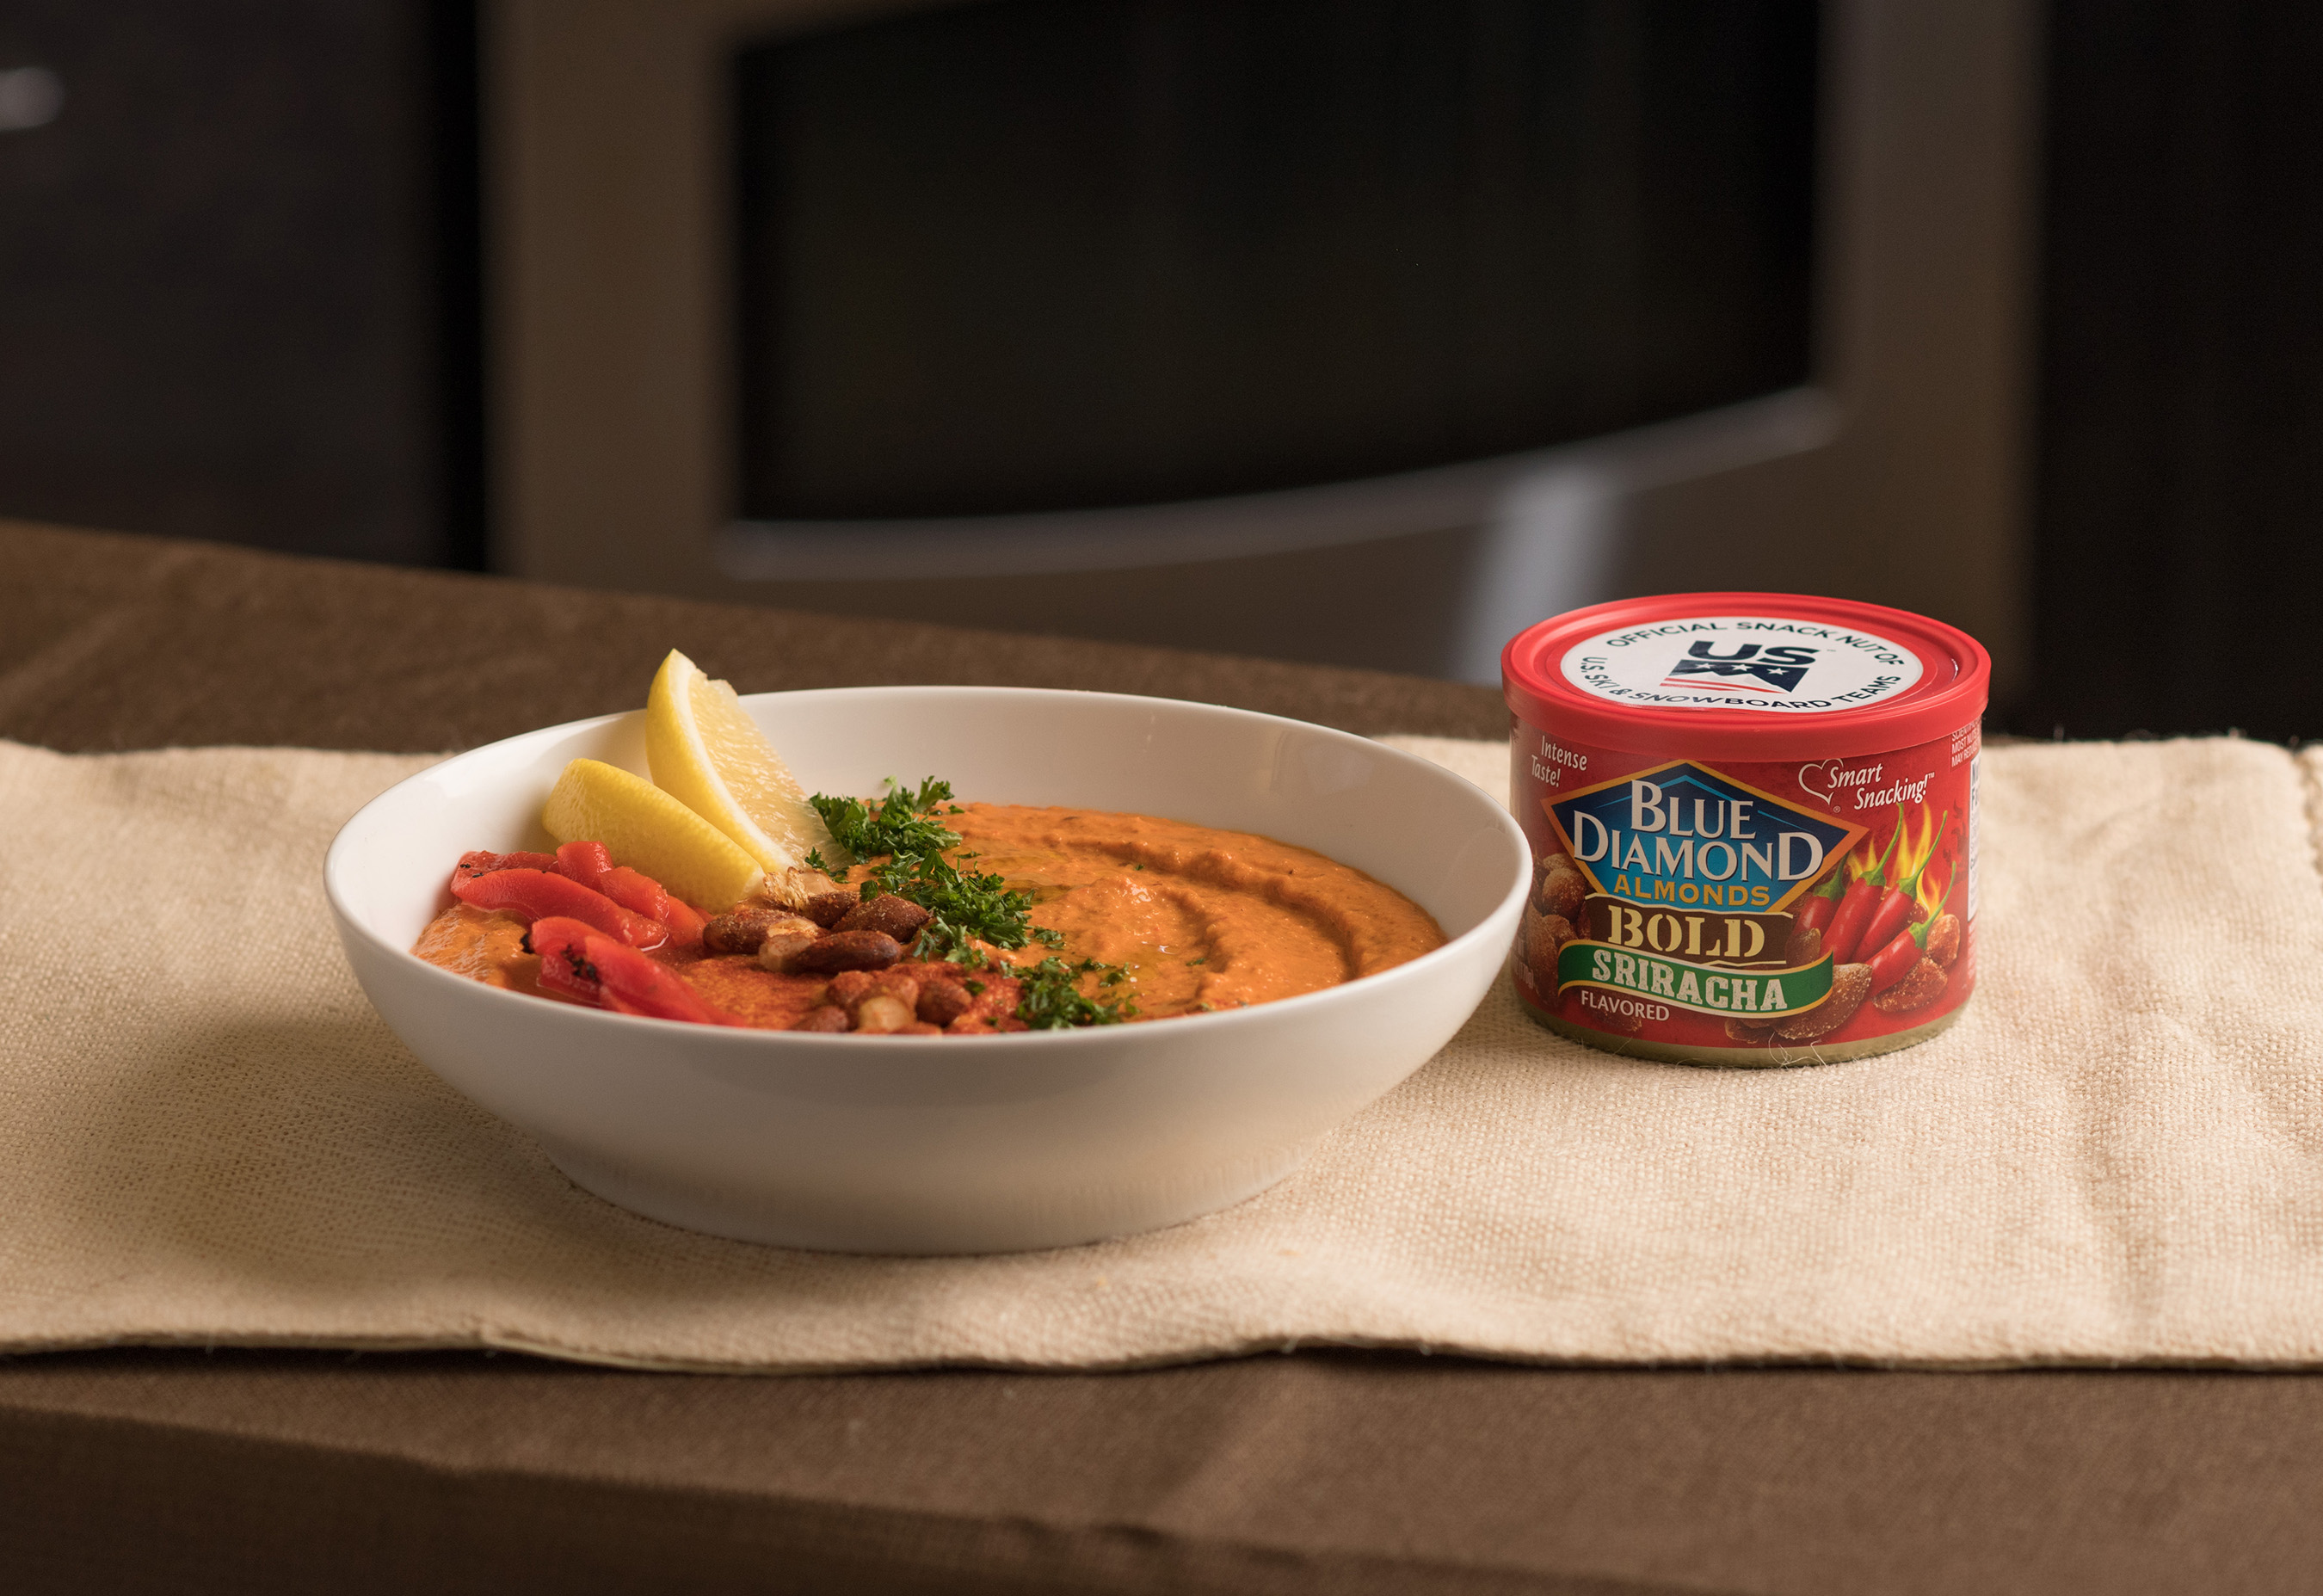 The Almond “Muhammara” Red Pepper Dip, made with Blue Diamond Sriracha almonds to give a punch of flavor, is a simple dish for chefs to quickly whip up for the U.S. Ski & Snowboard Team.